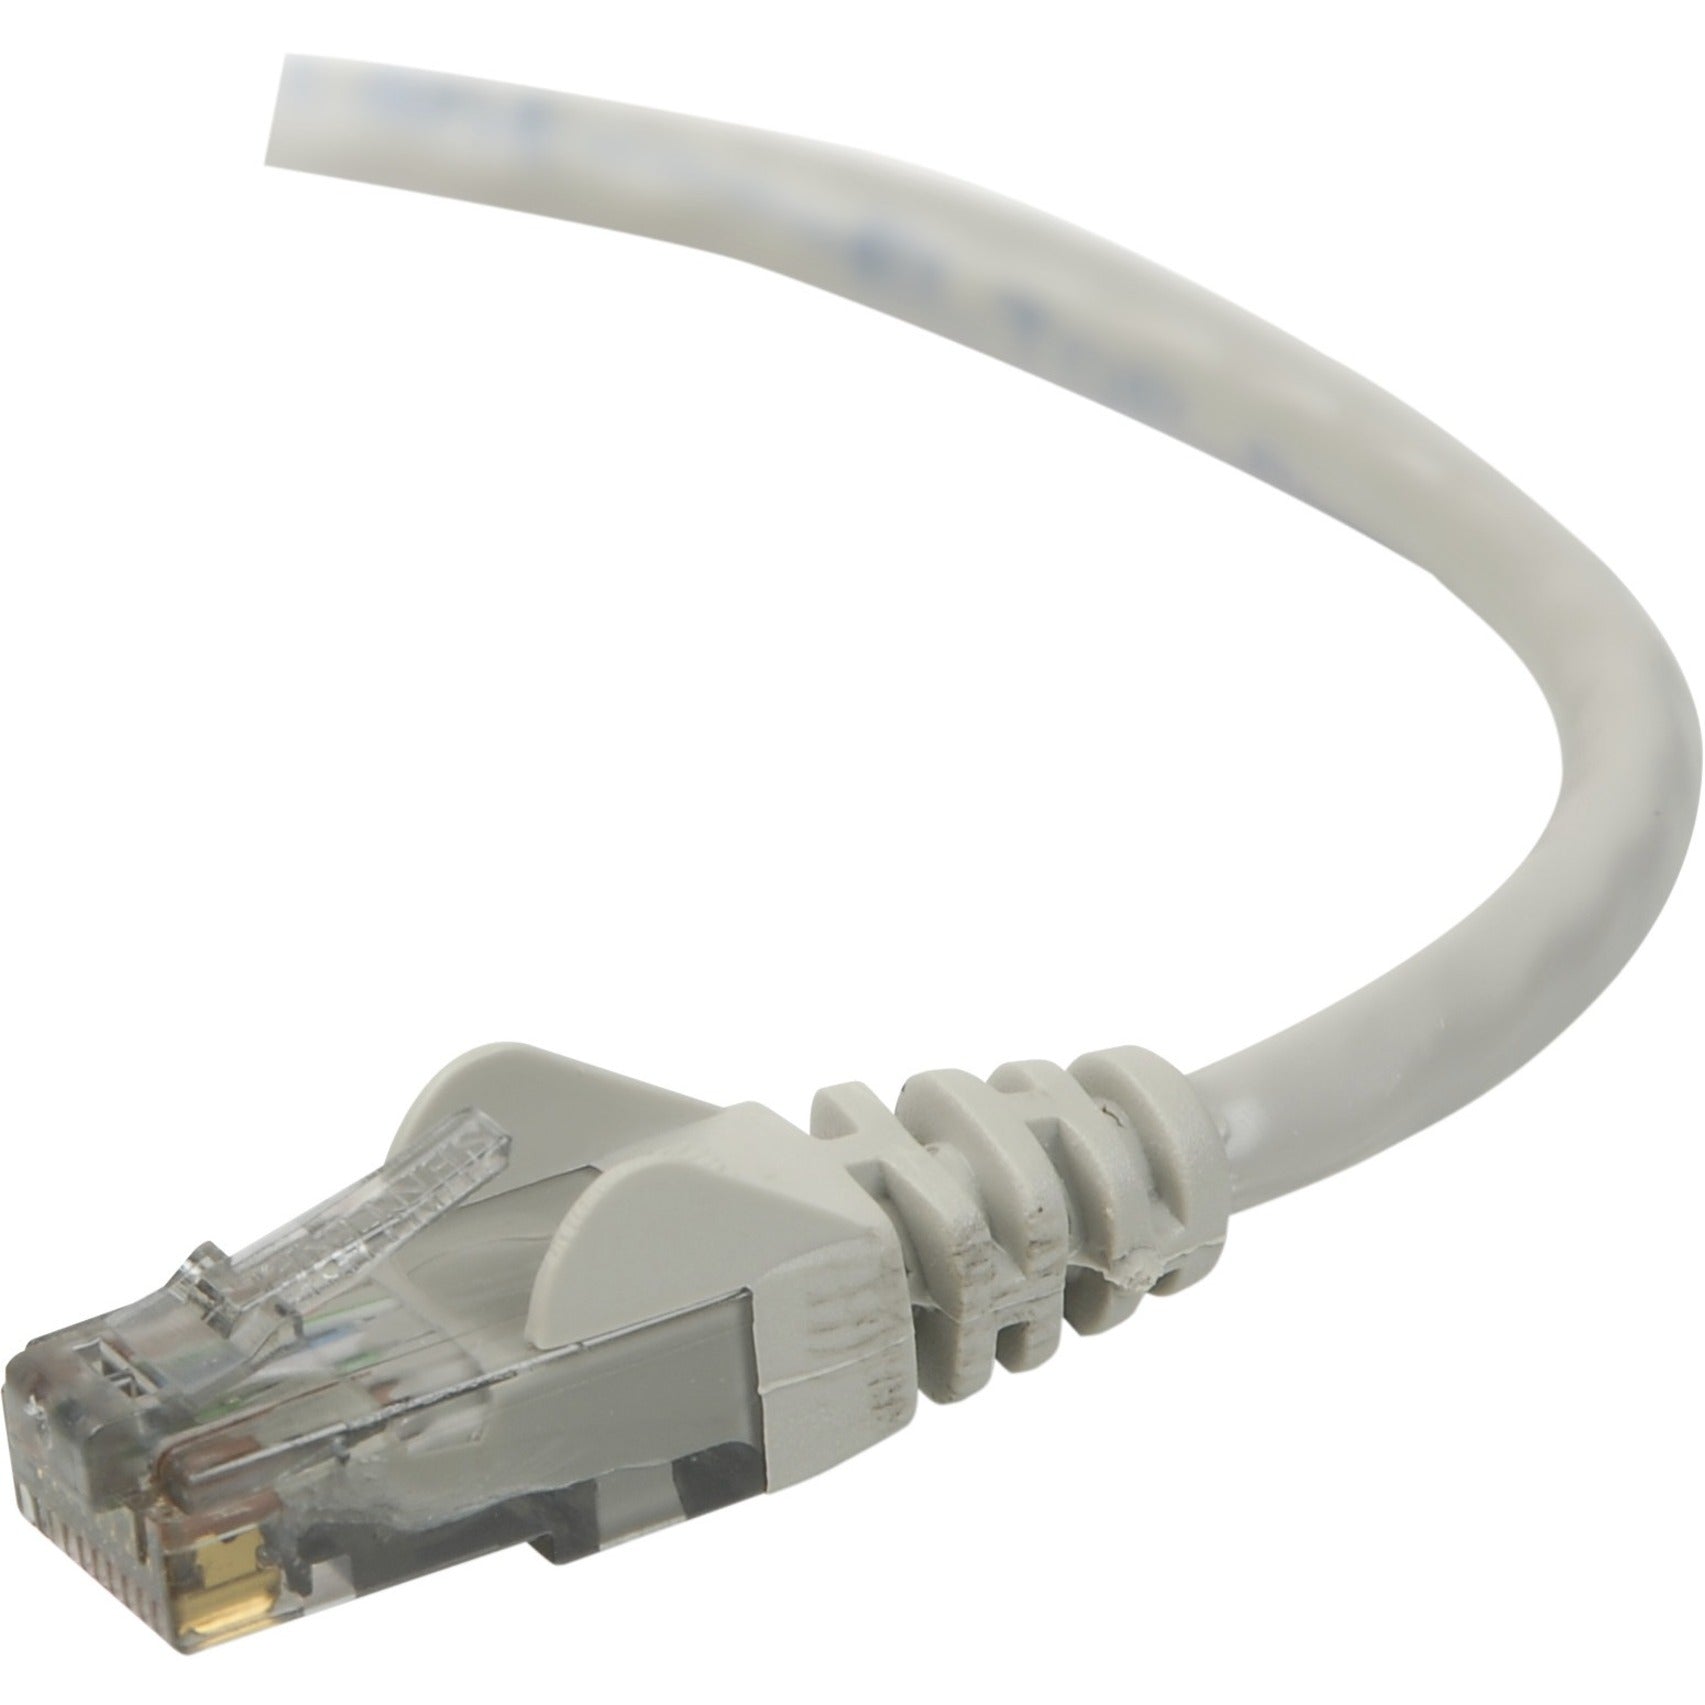 Belkin A3L980-20 RJ45 Category 6 Patch Cable, 20 ft, Copper Conductor, Gold Plated Connectors